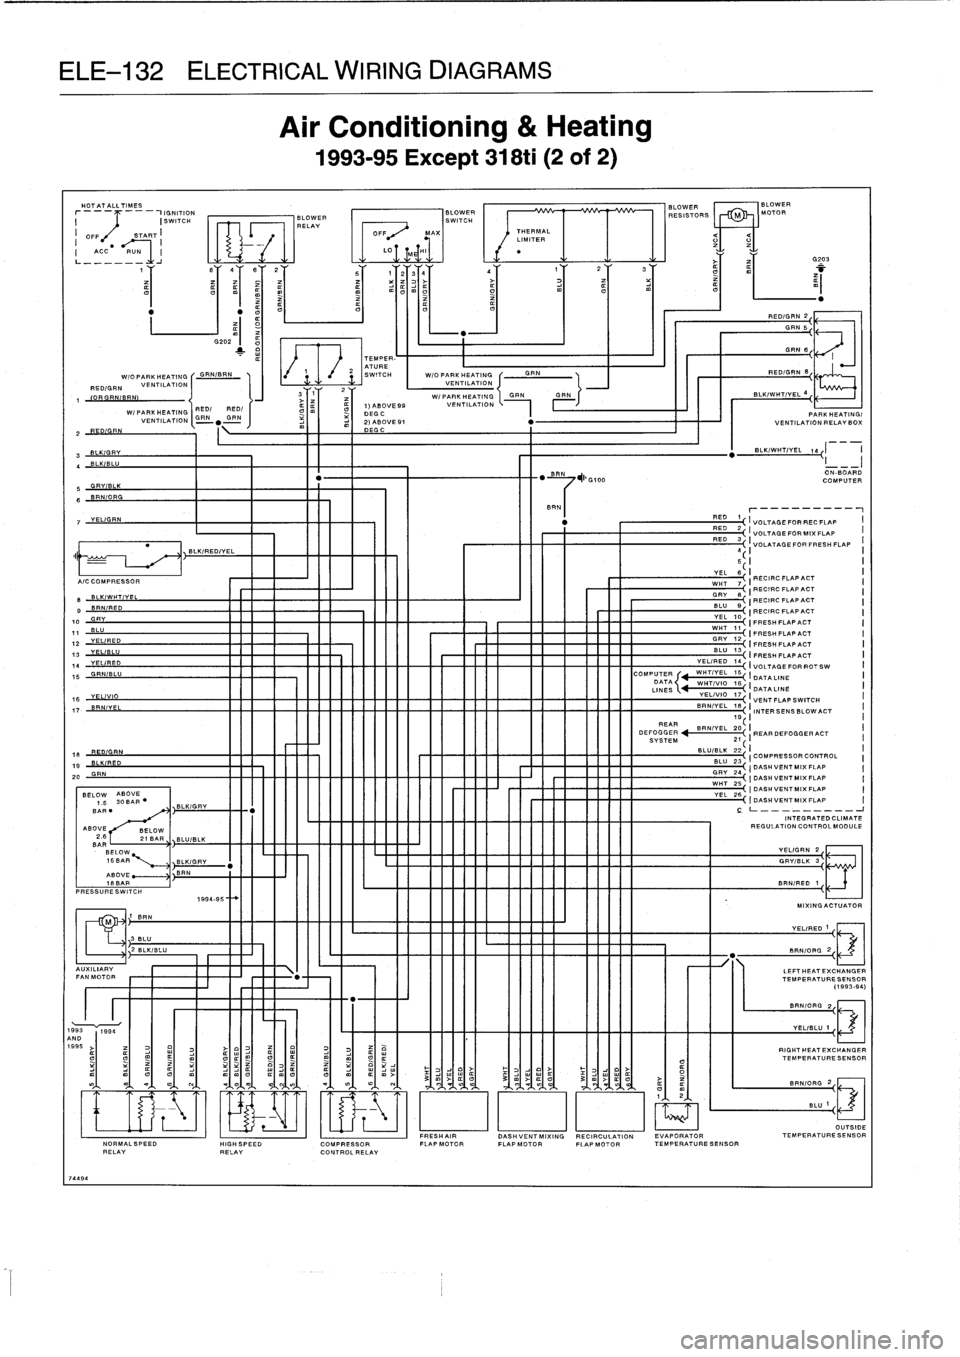 BMW 318i 1996 E36 Workshop Manual (759 Pages), Page 620: ELE-128 ELECTRICAL WIRING DIAGRAMS